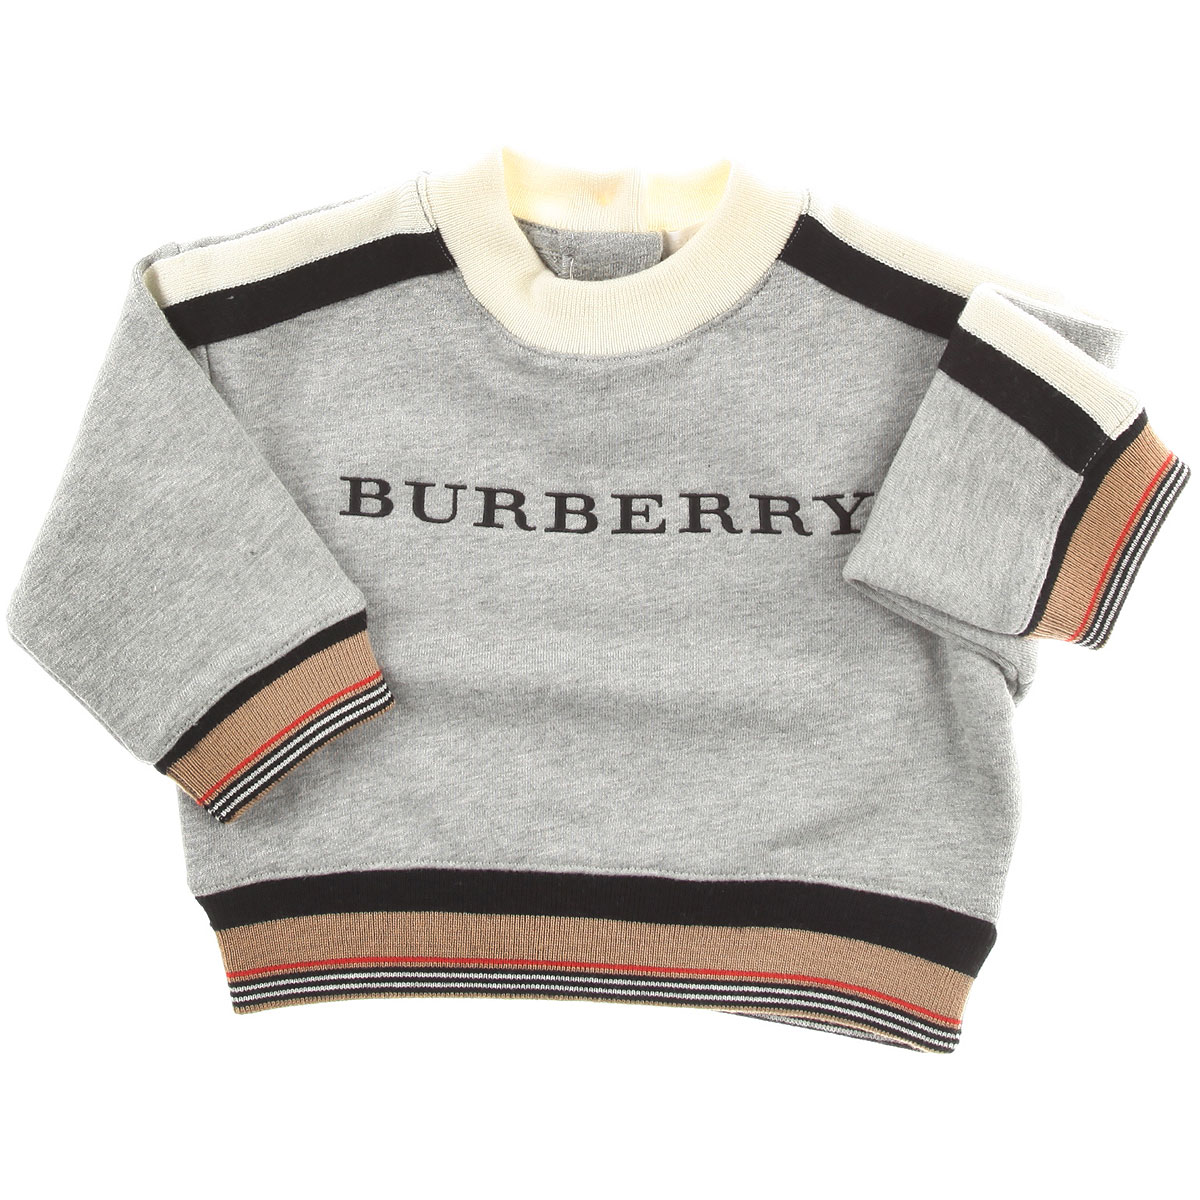 Babyburberry leaked